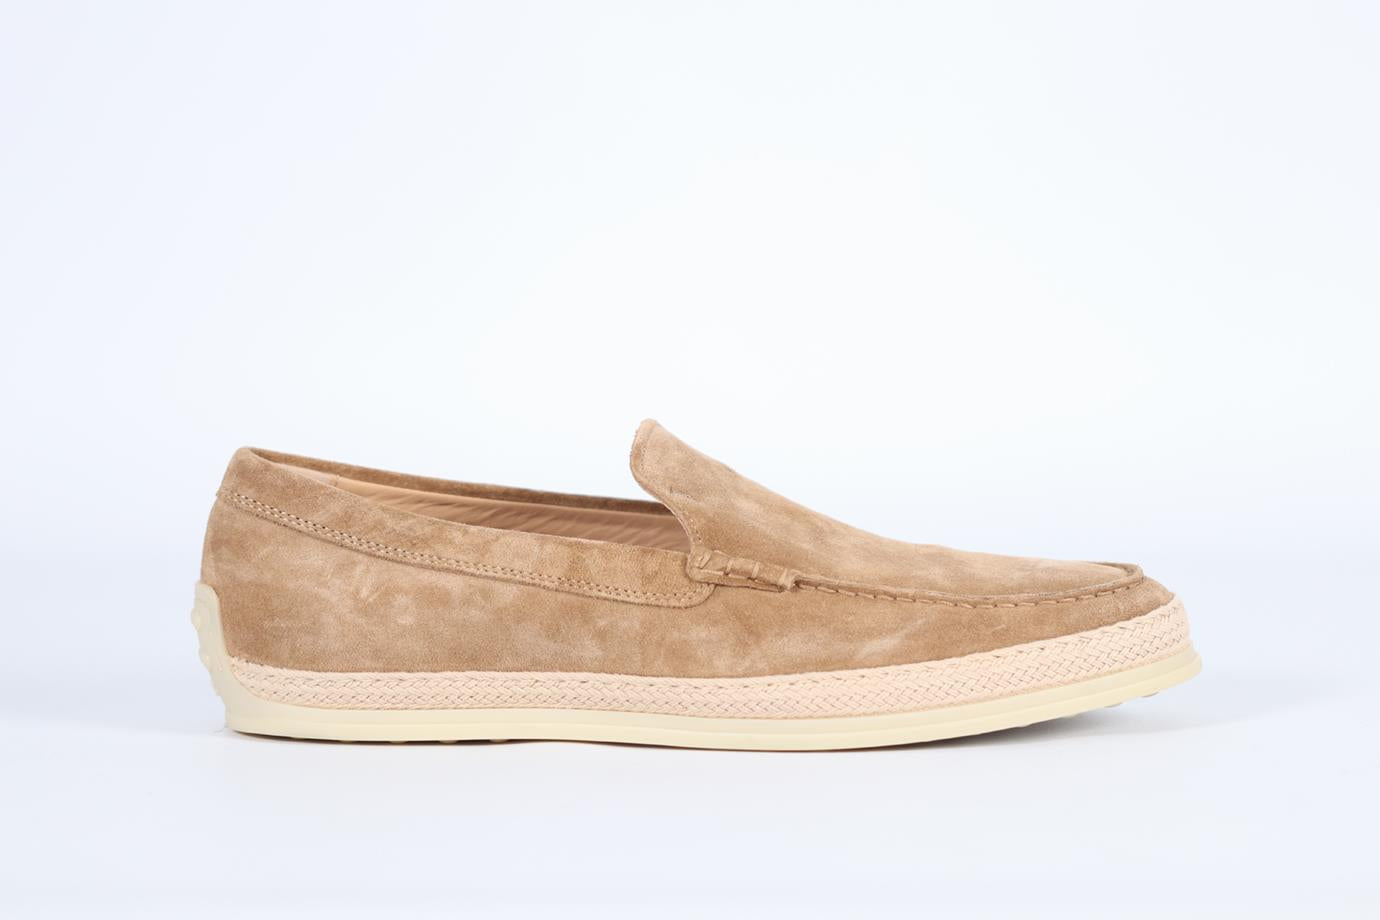 TOD'S MEN'S SUEDE LOAFERS EU 44.5 UK 10.5 US 11.5